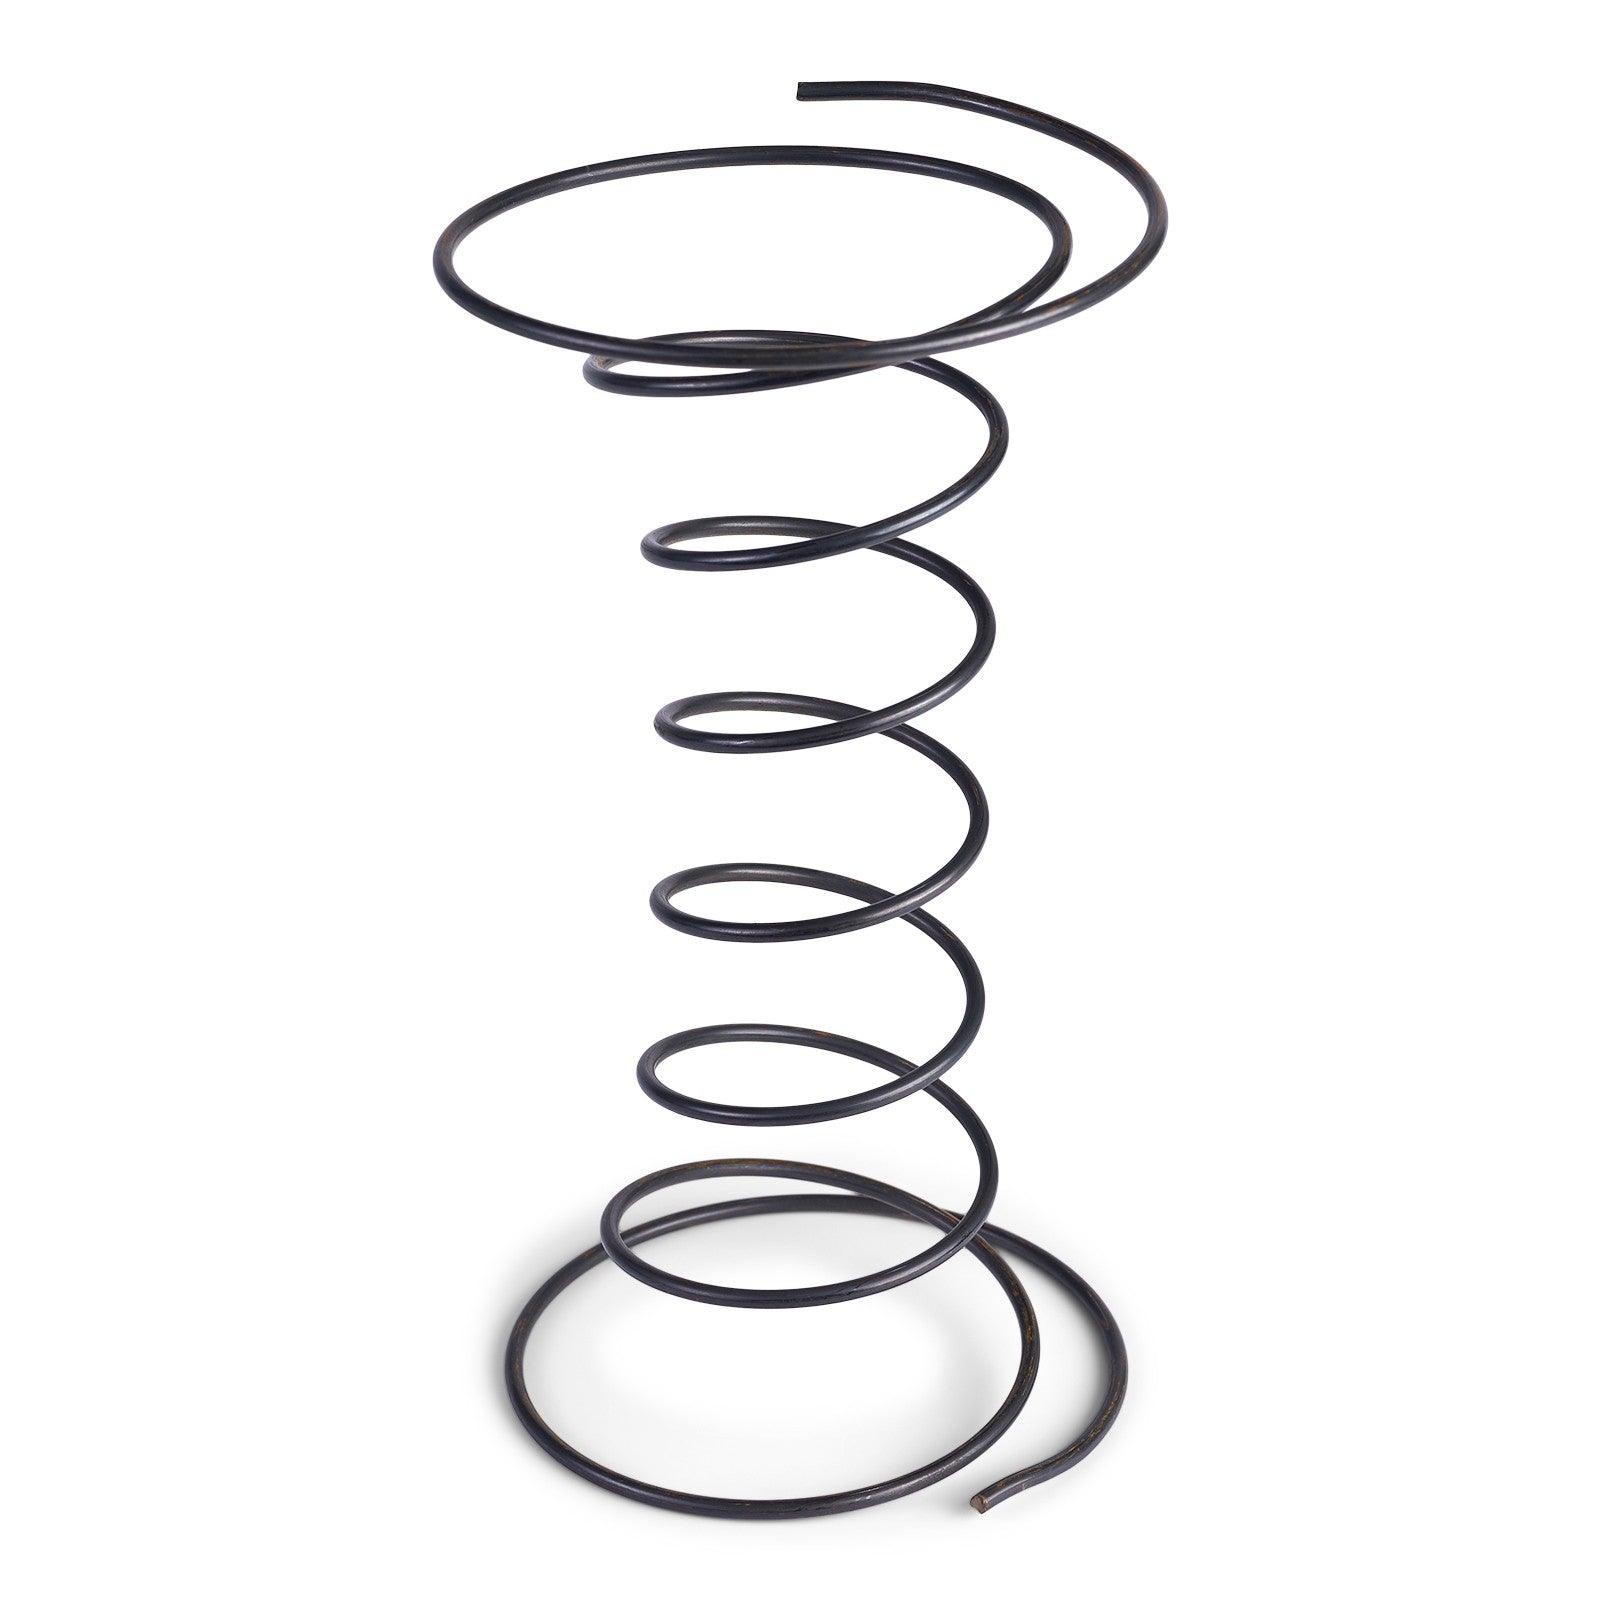 CushionCraft Coil Springs Trim and Finishing Supplies